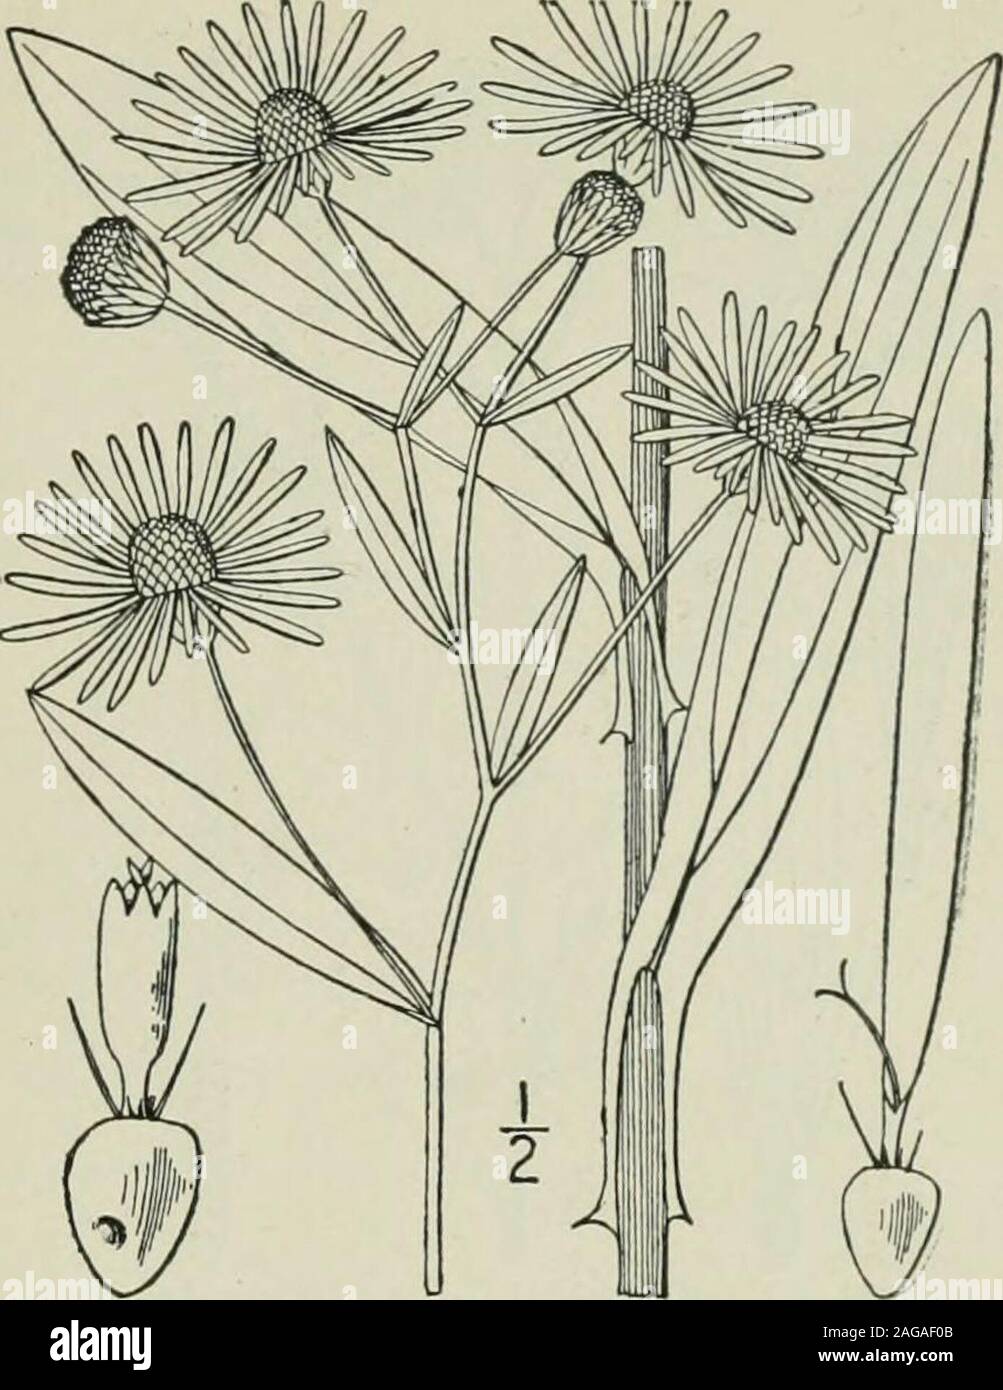 . An illustrated flora of the northern United States, Canada and the British possessions : from Newfoundland to the parallel of the southern boundary of Virginia and from the Atlantic Ocean westward to the 102nd meridian. acts of the in-volucre oblong-spatulate, obtuse or mucronate;pappus of numerous small short broad scales and2 long bristles. Western Missouri, Kansas, Arkansas and Okla-homa. Autumn. Genus 29. THISTLE FAMILY. 405 4, Boltonia decurrens (T. & G.) Wood.Clasping-leaved Boltonia. Fig. 4278. BoV.onia glastifolia var. ( ?) decurrens T. & G. Fl. N.A. 2: 188. 1841. Boltonia decurrens Stock Photo